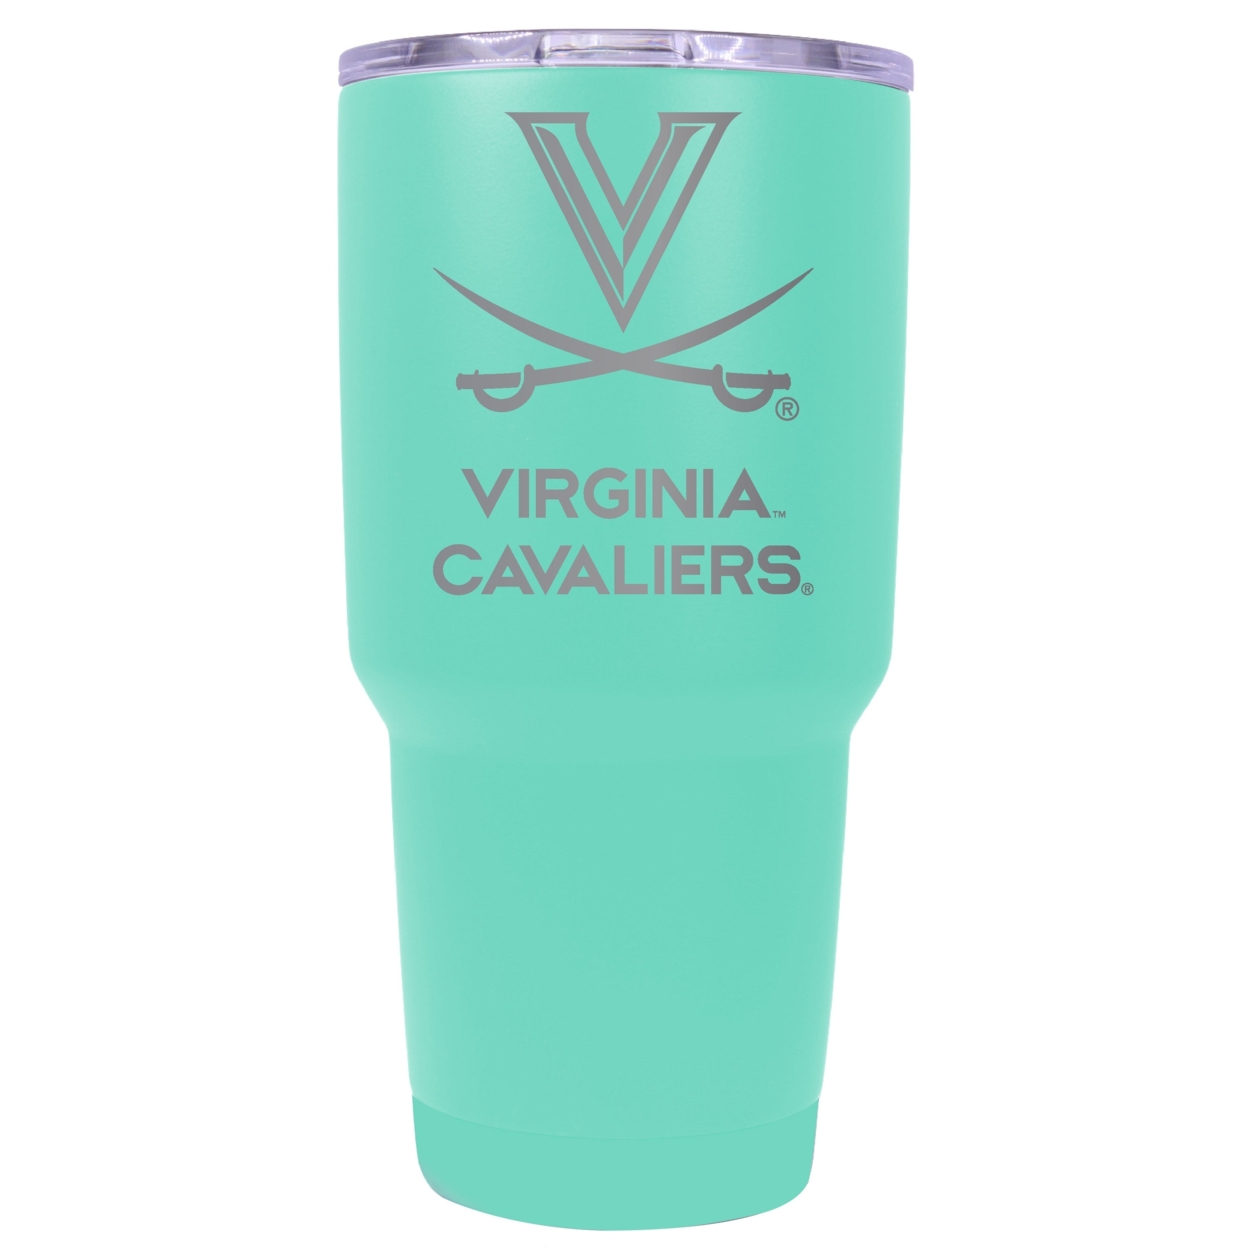 Virginia Cavaliers 24 Oz Laser Engraved Stainless Steel Insulated Tumbler - Choose Your Color. - Navy